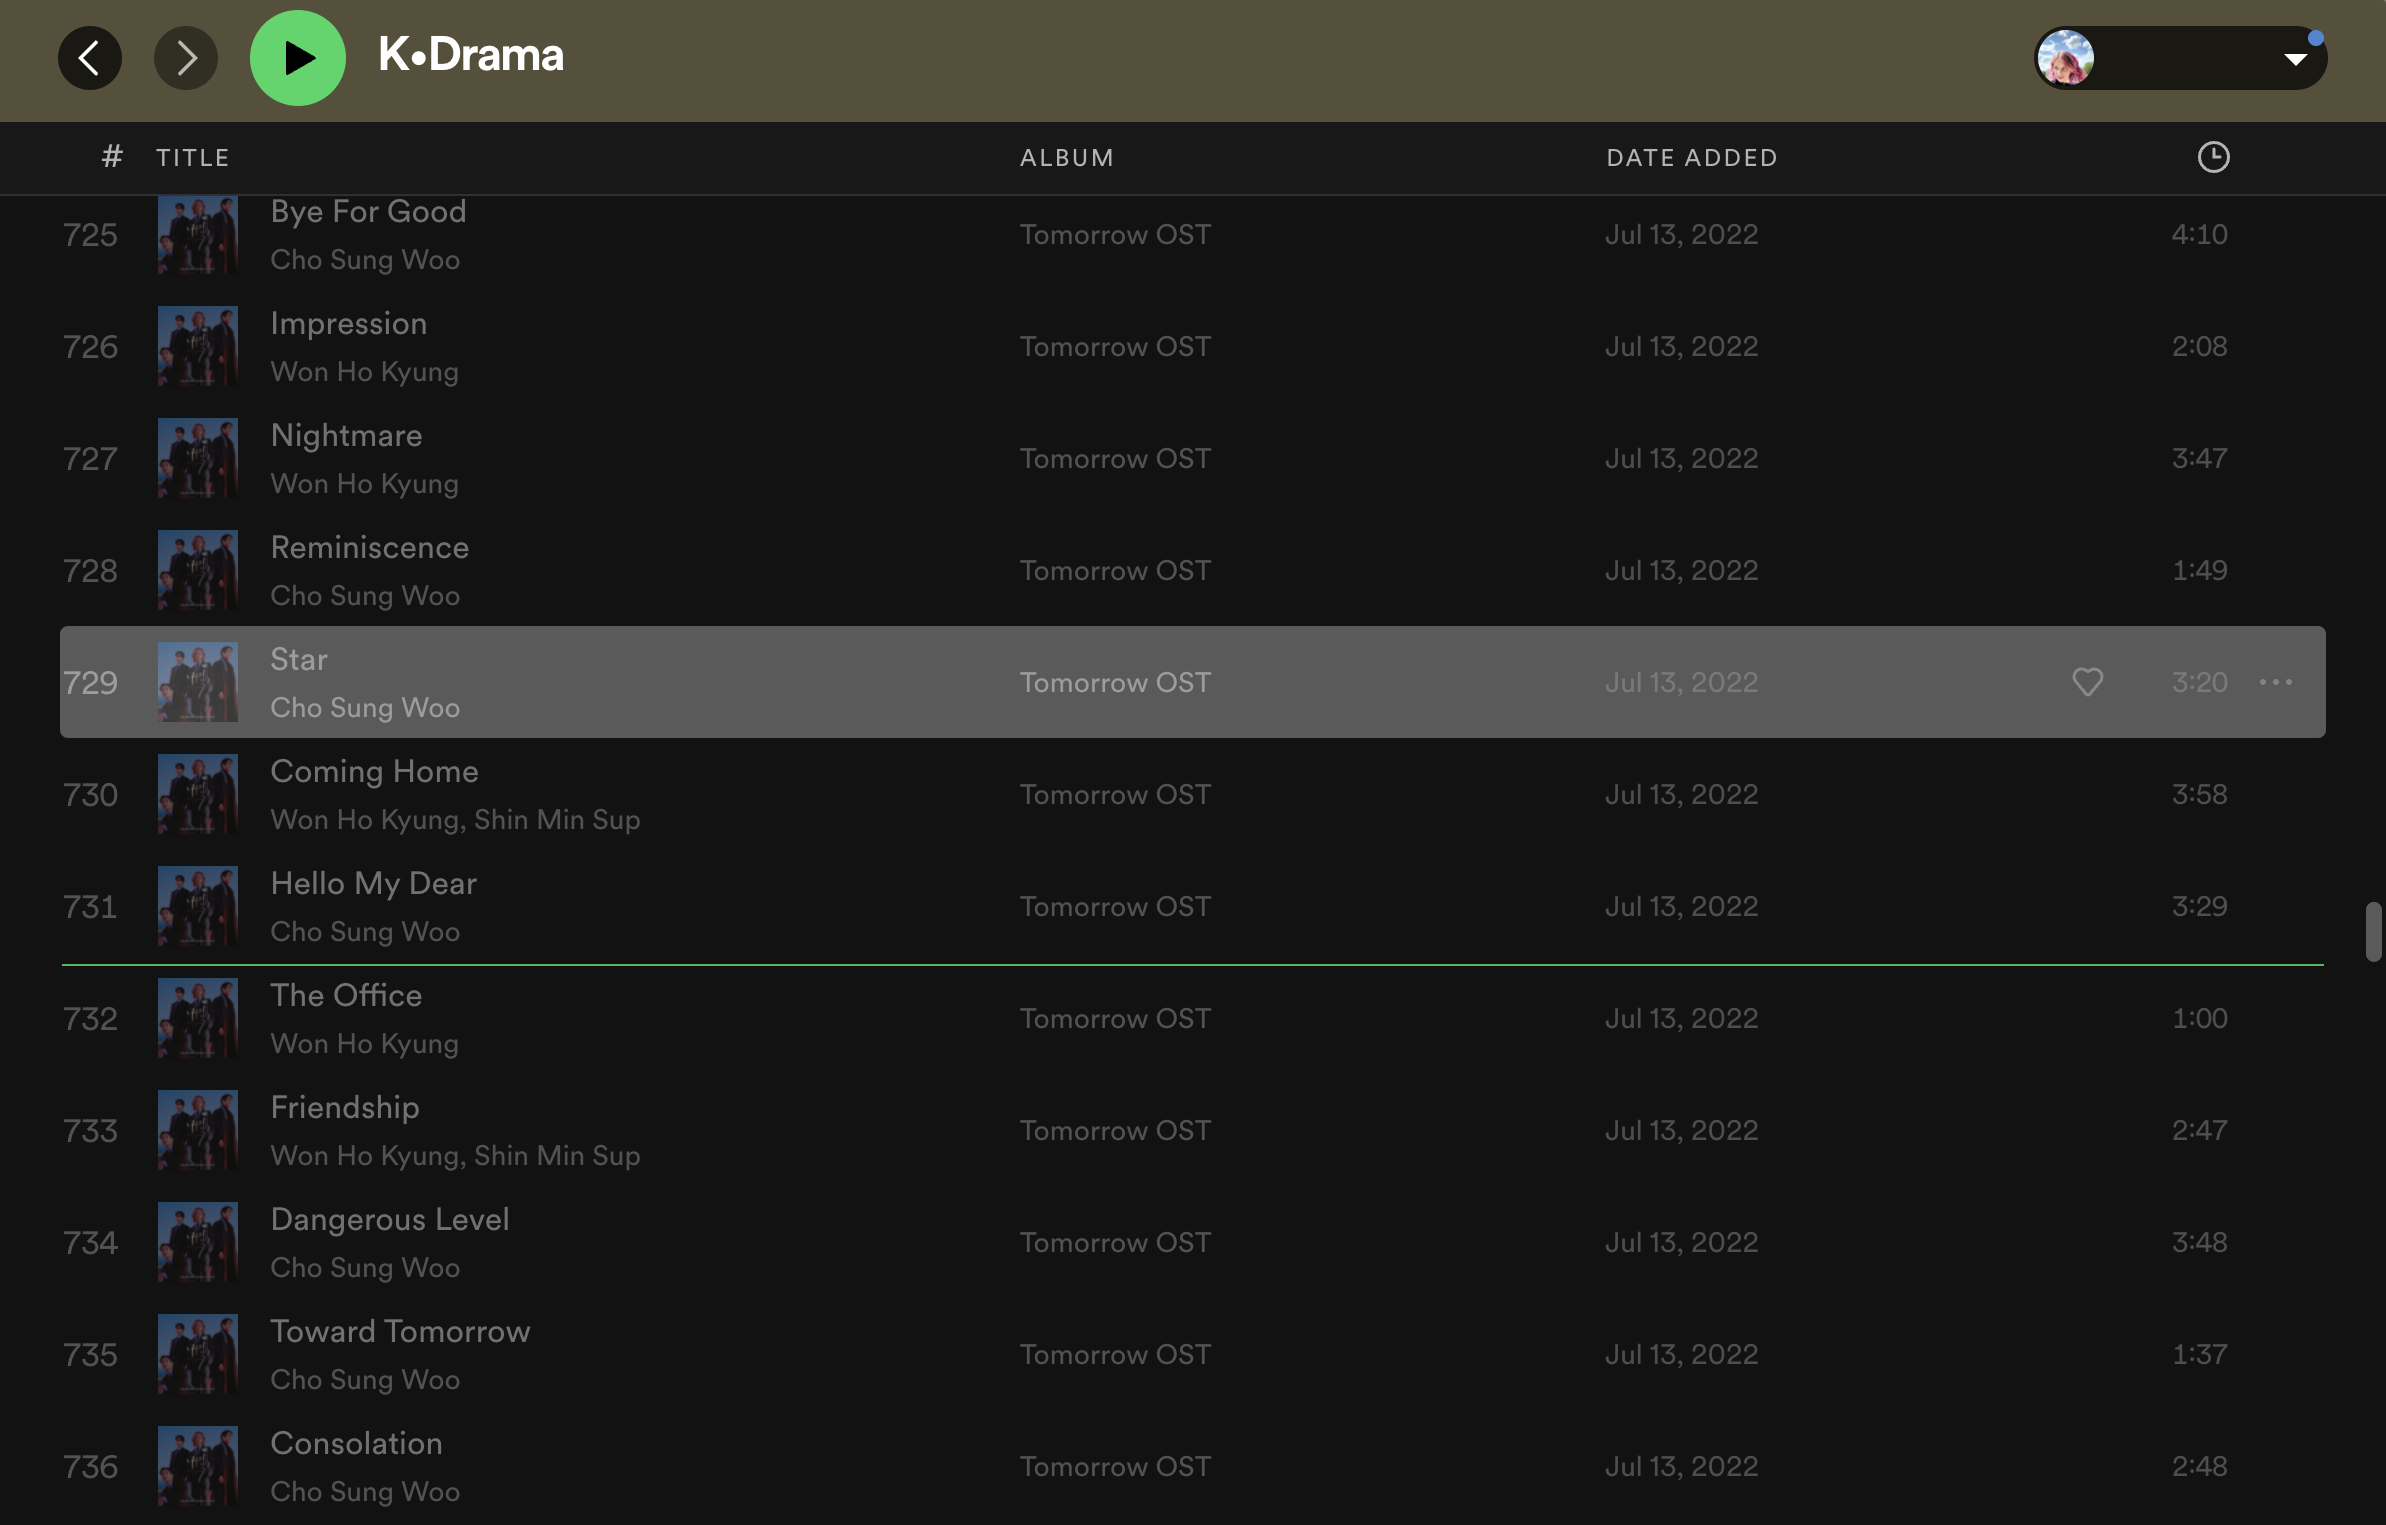 A screengrab of the desktop Spotify application showing a playlist titled K-Drama. The list includes many titles from the Tomorrow soundtrack and Star by Cho Sung Woo is selected.